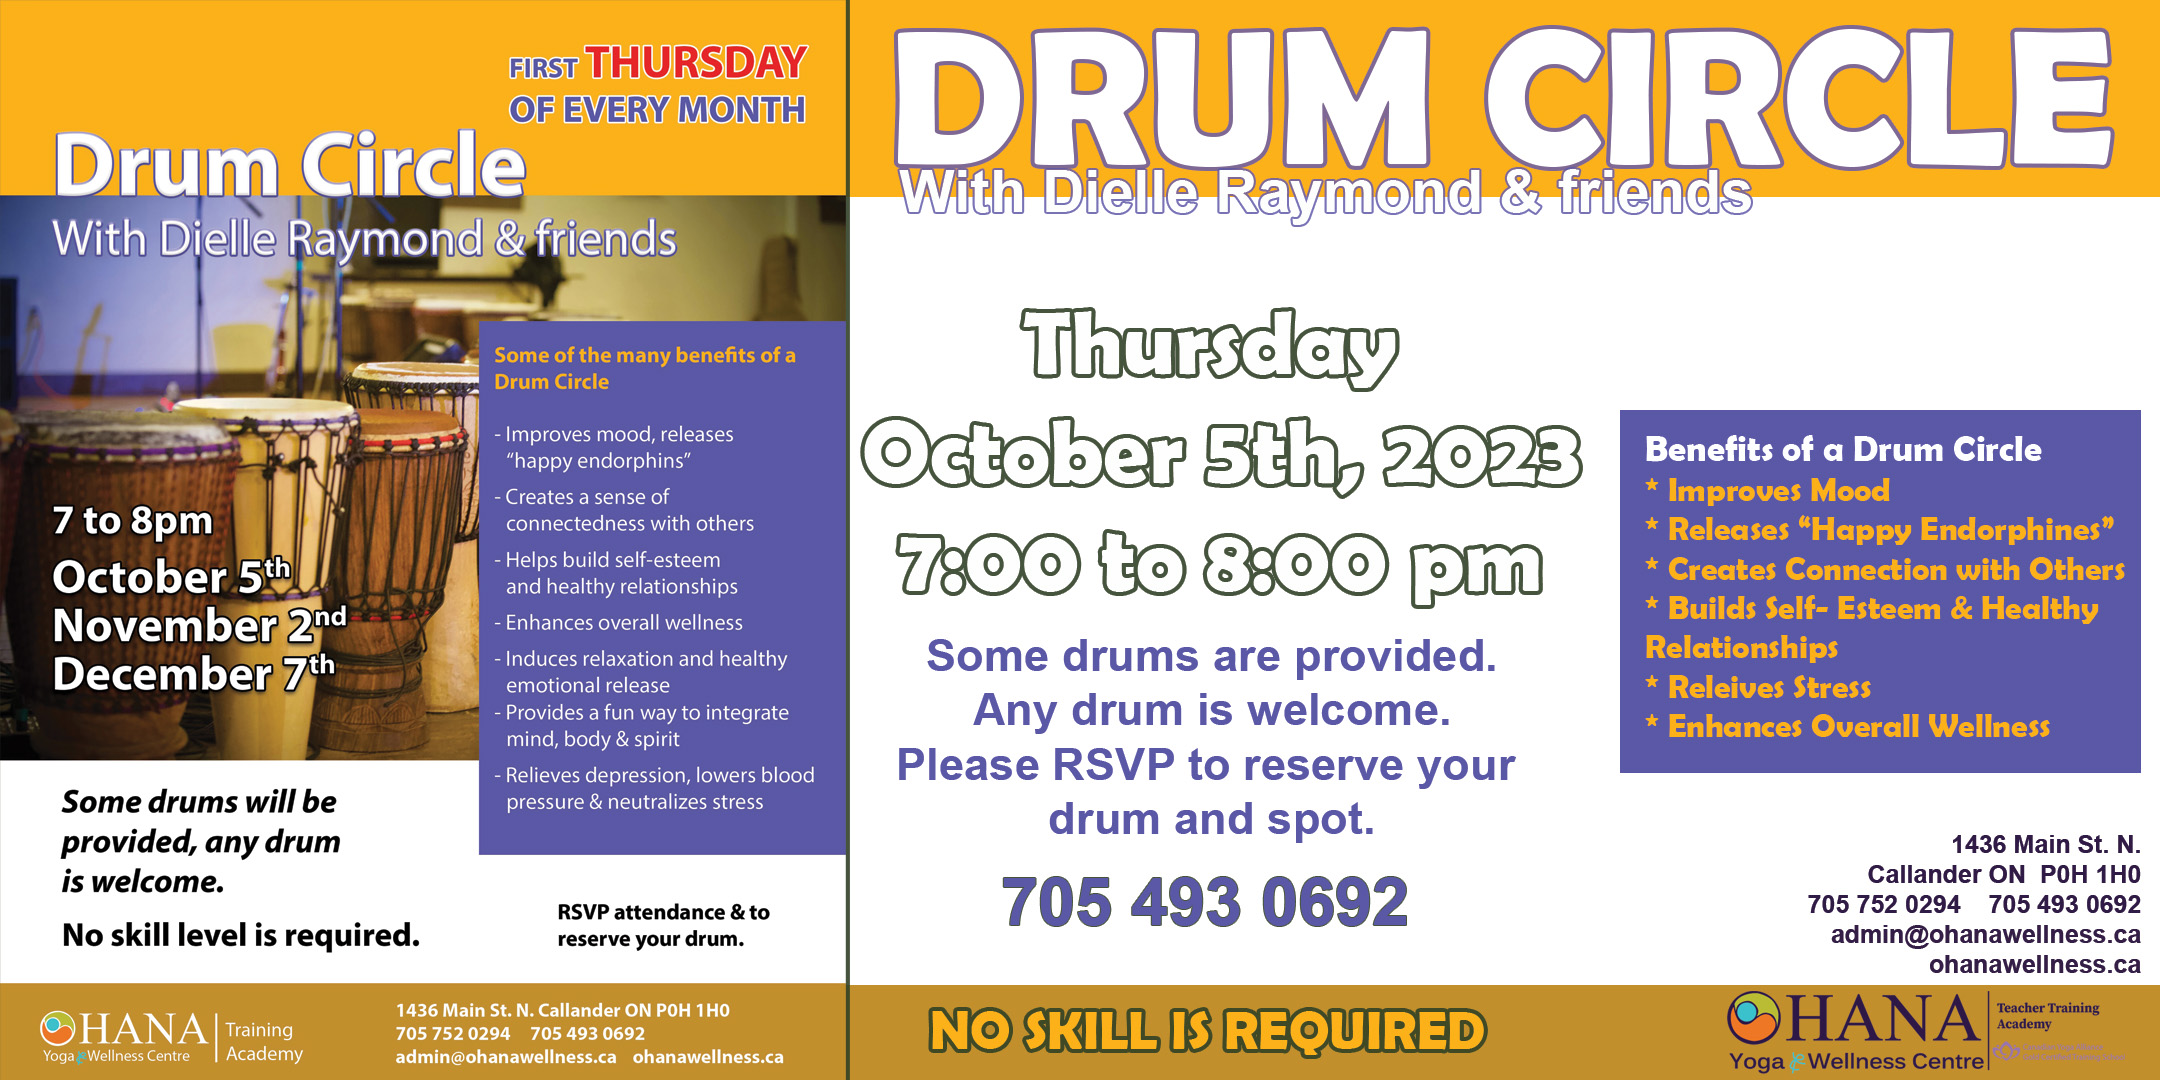 Drum Circle with Dielle Raymond & Friends